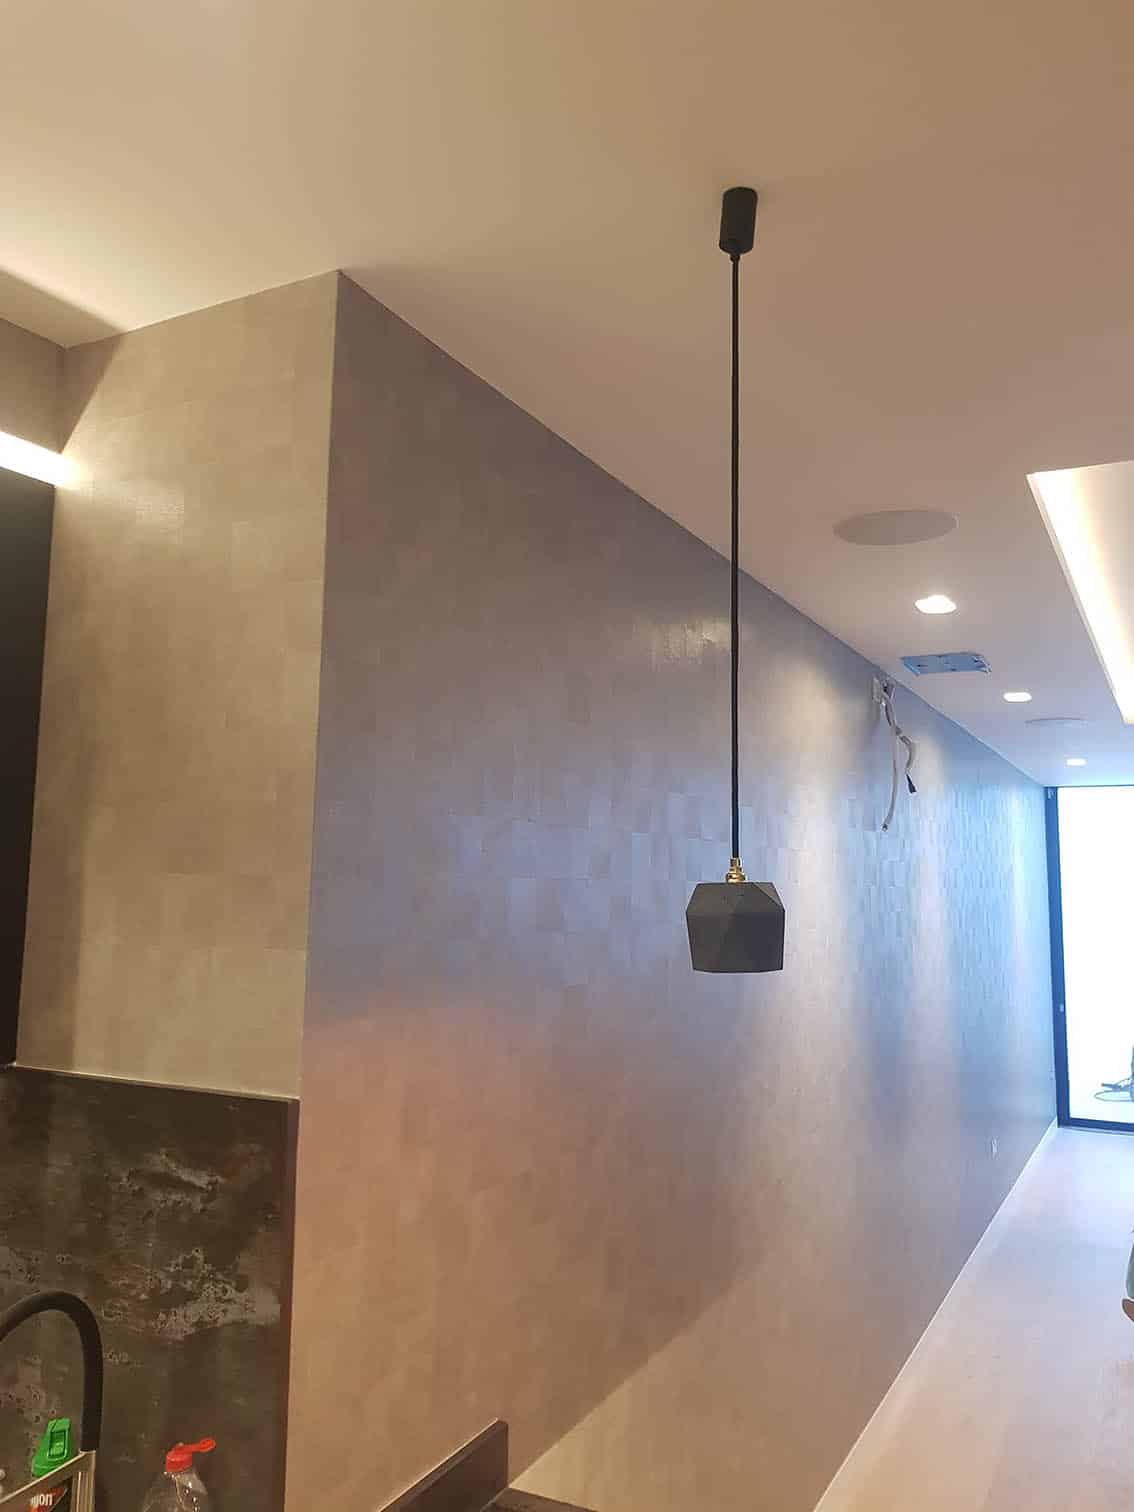 Armani Casa Designer wallpaper professionally installed by Bluespec Decorating Limited wallpaper hangers in London. Wallpaper is beige in colour and patterned. There are long hanging light from the ceiling.